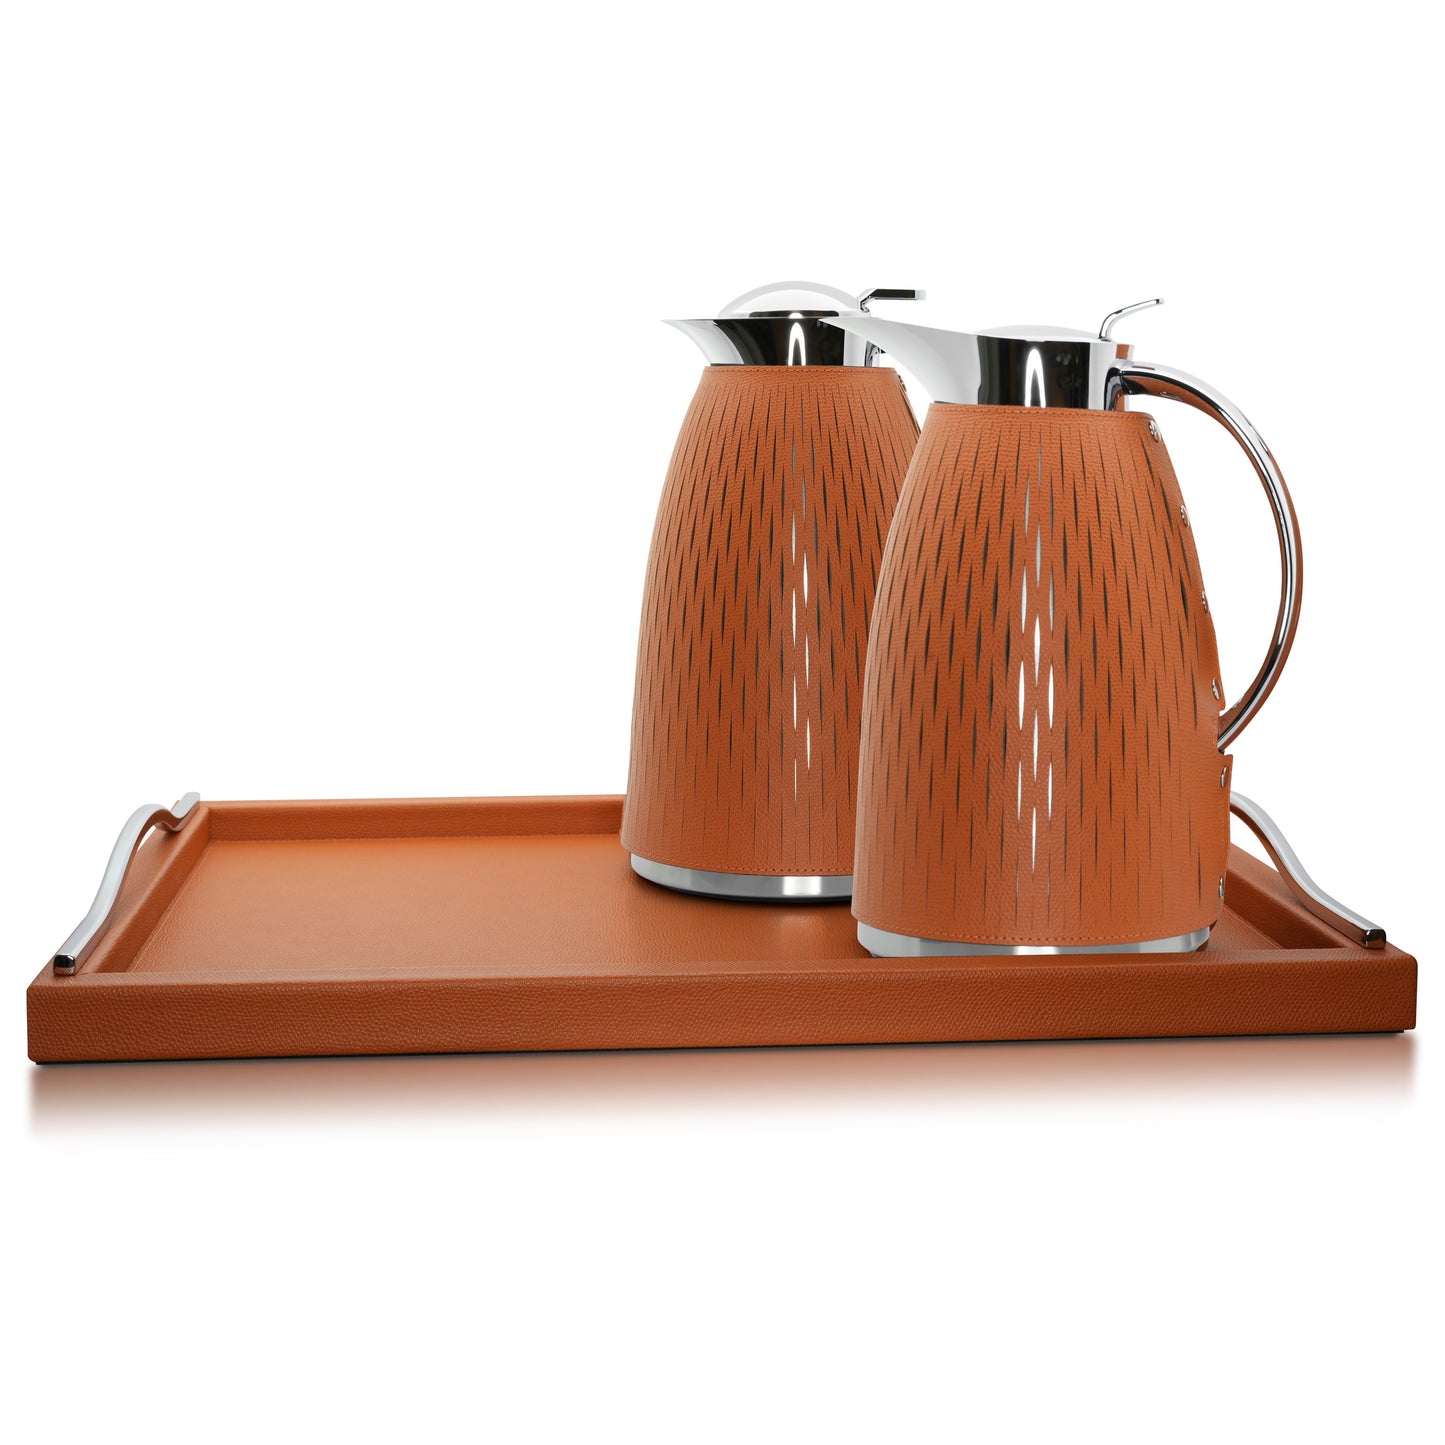 Janine & Kamila Carafe Biscuit Set with Tray